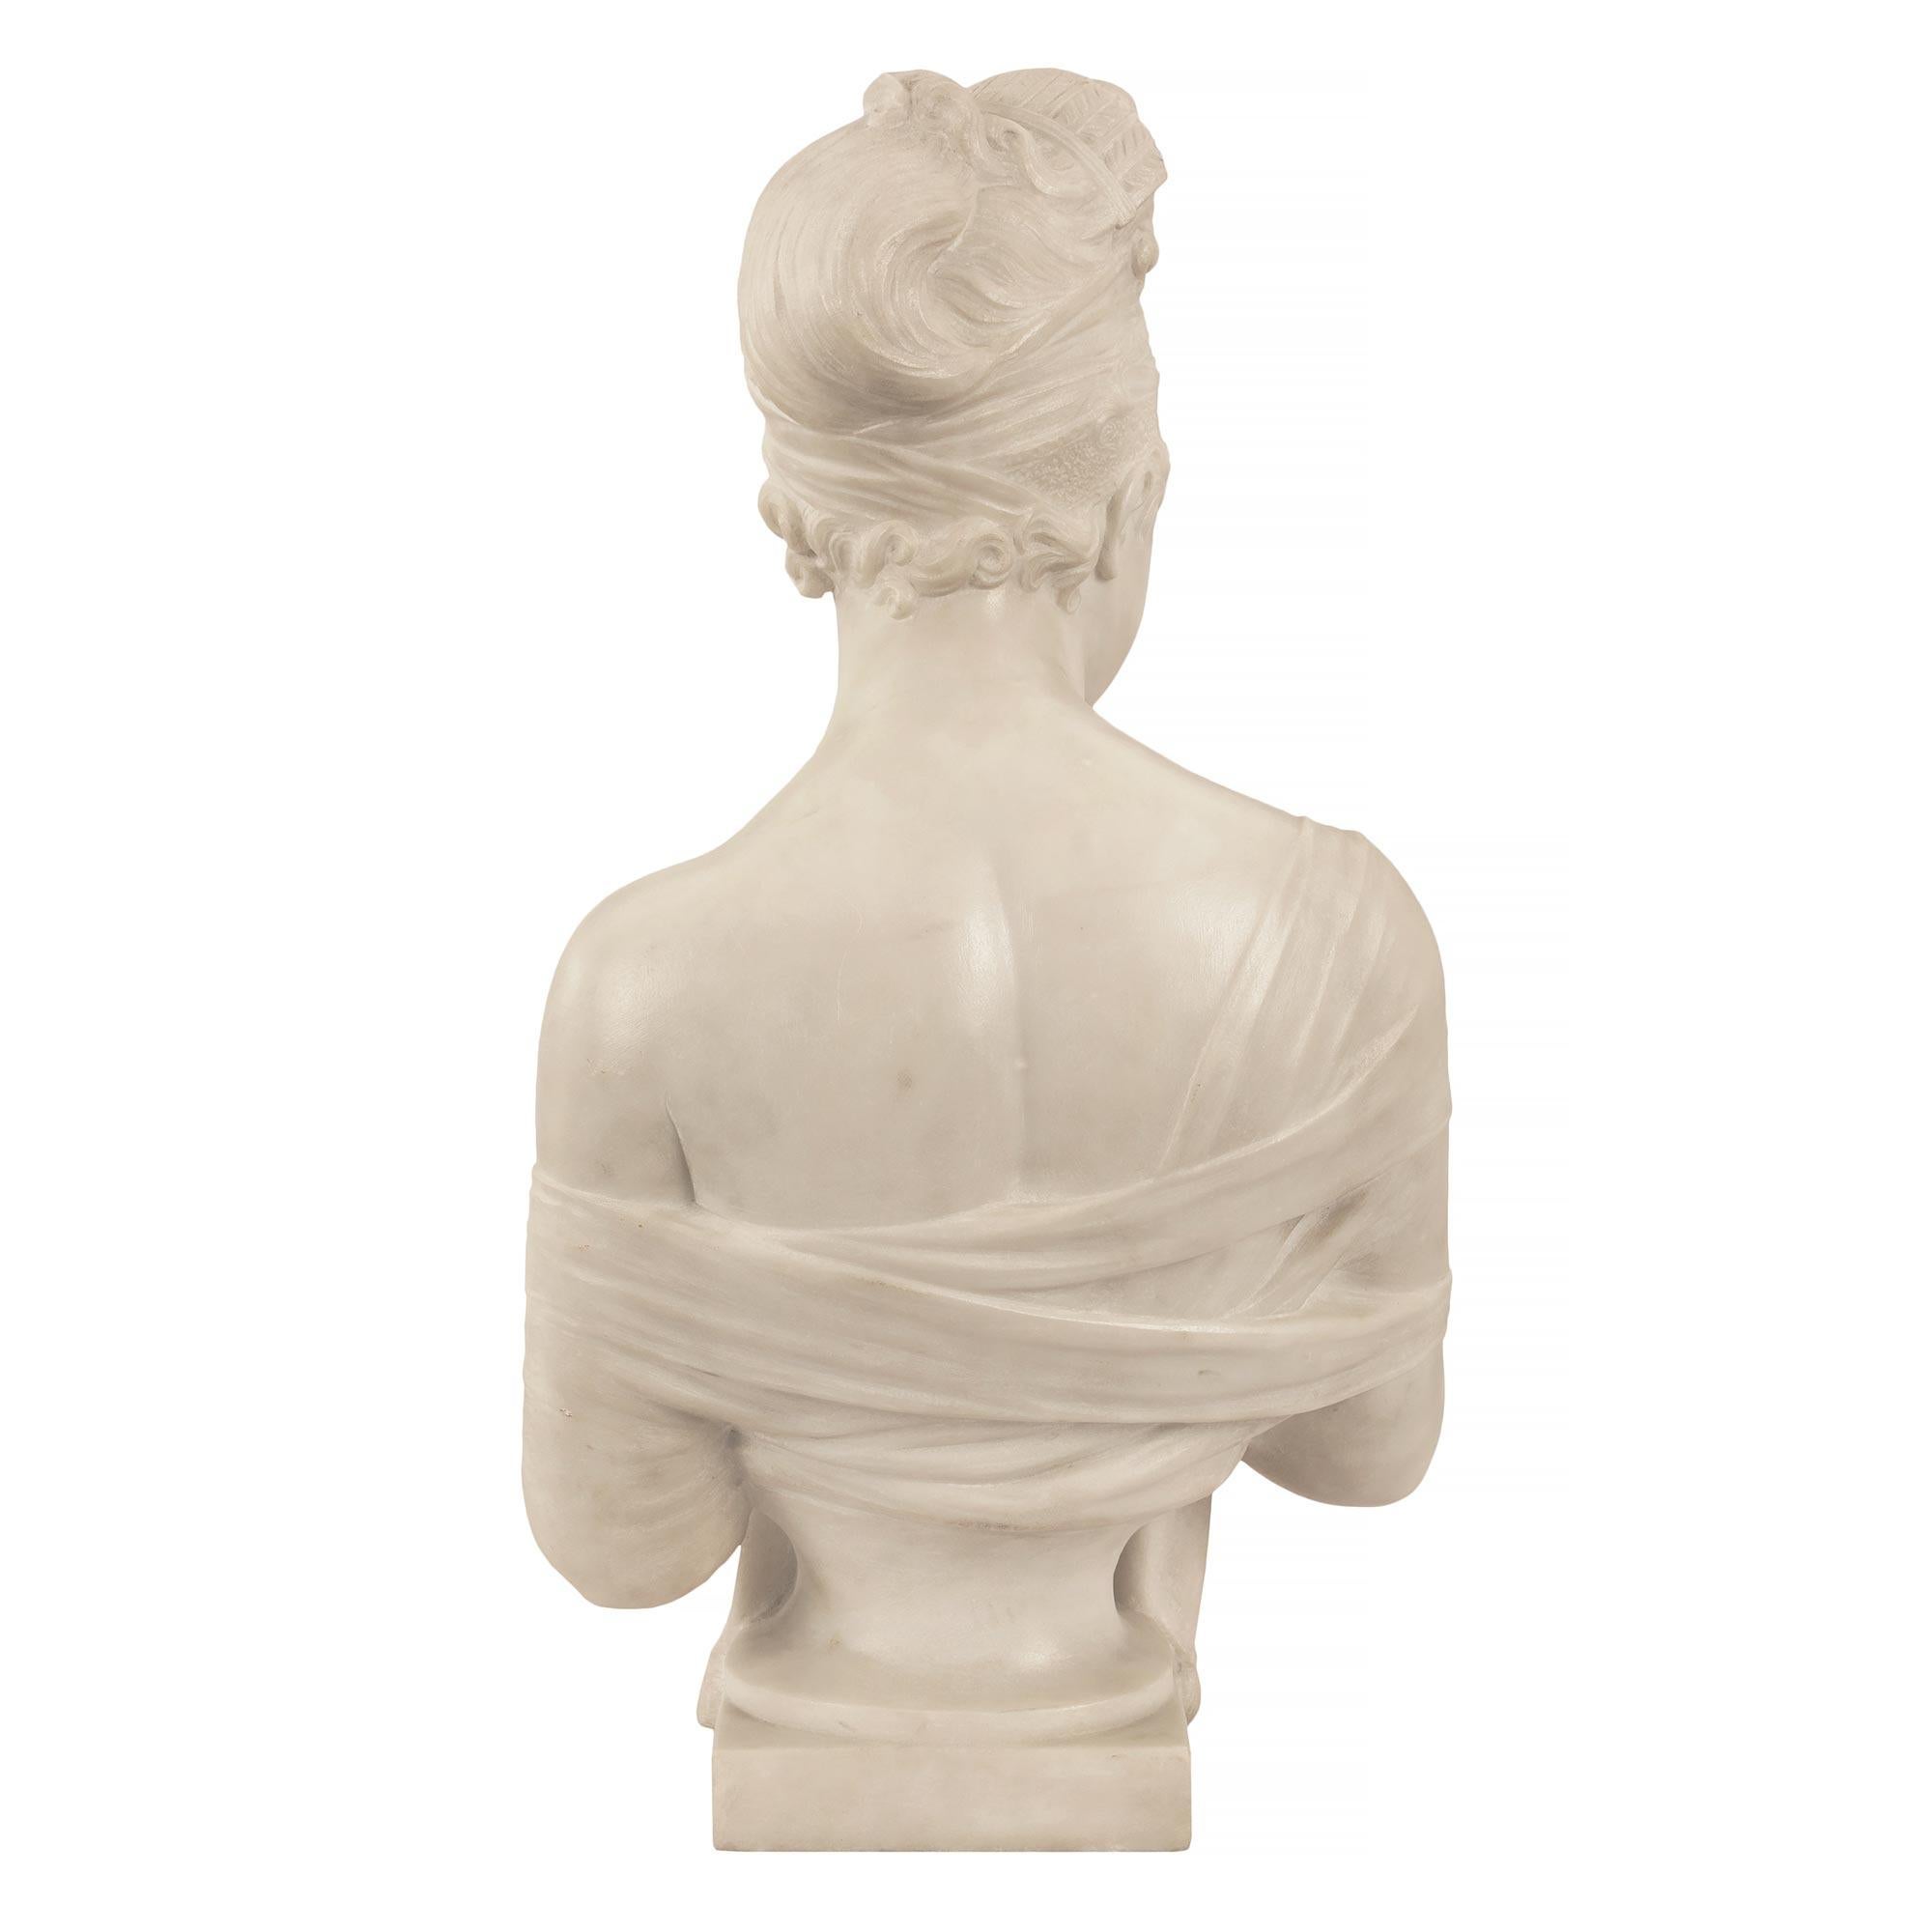 Italian 19th Century Neoclassical St. Carrara Marble Bust of Juliette Recamier For Sale 2